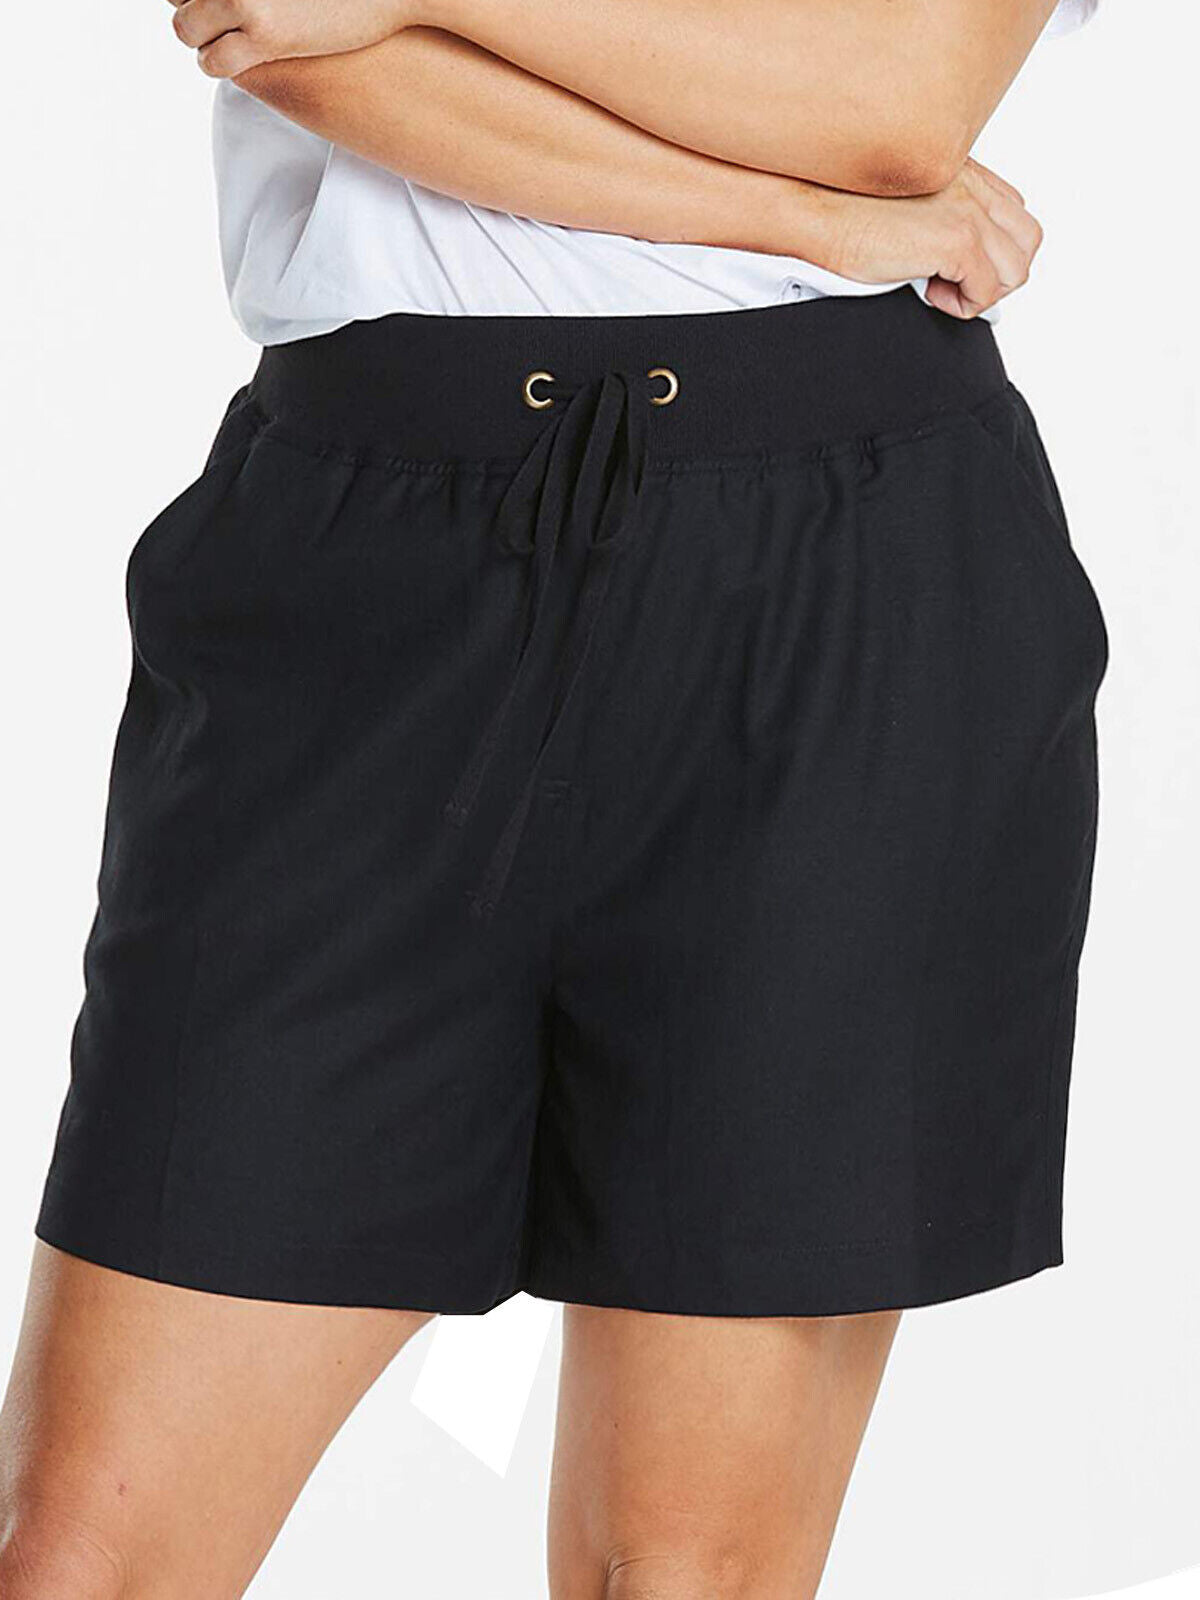 New Capsule Black Linen Blend Slouch Shorts in Size 32